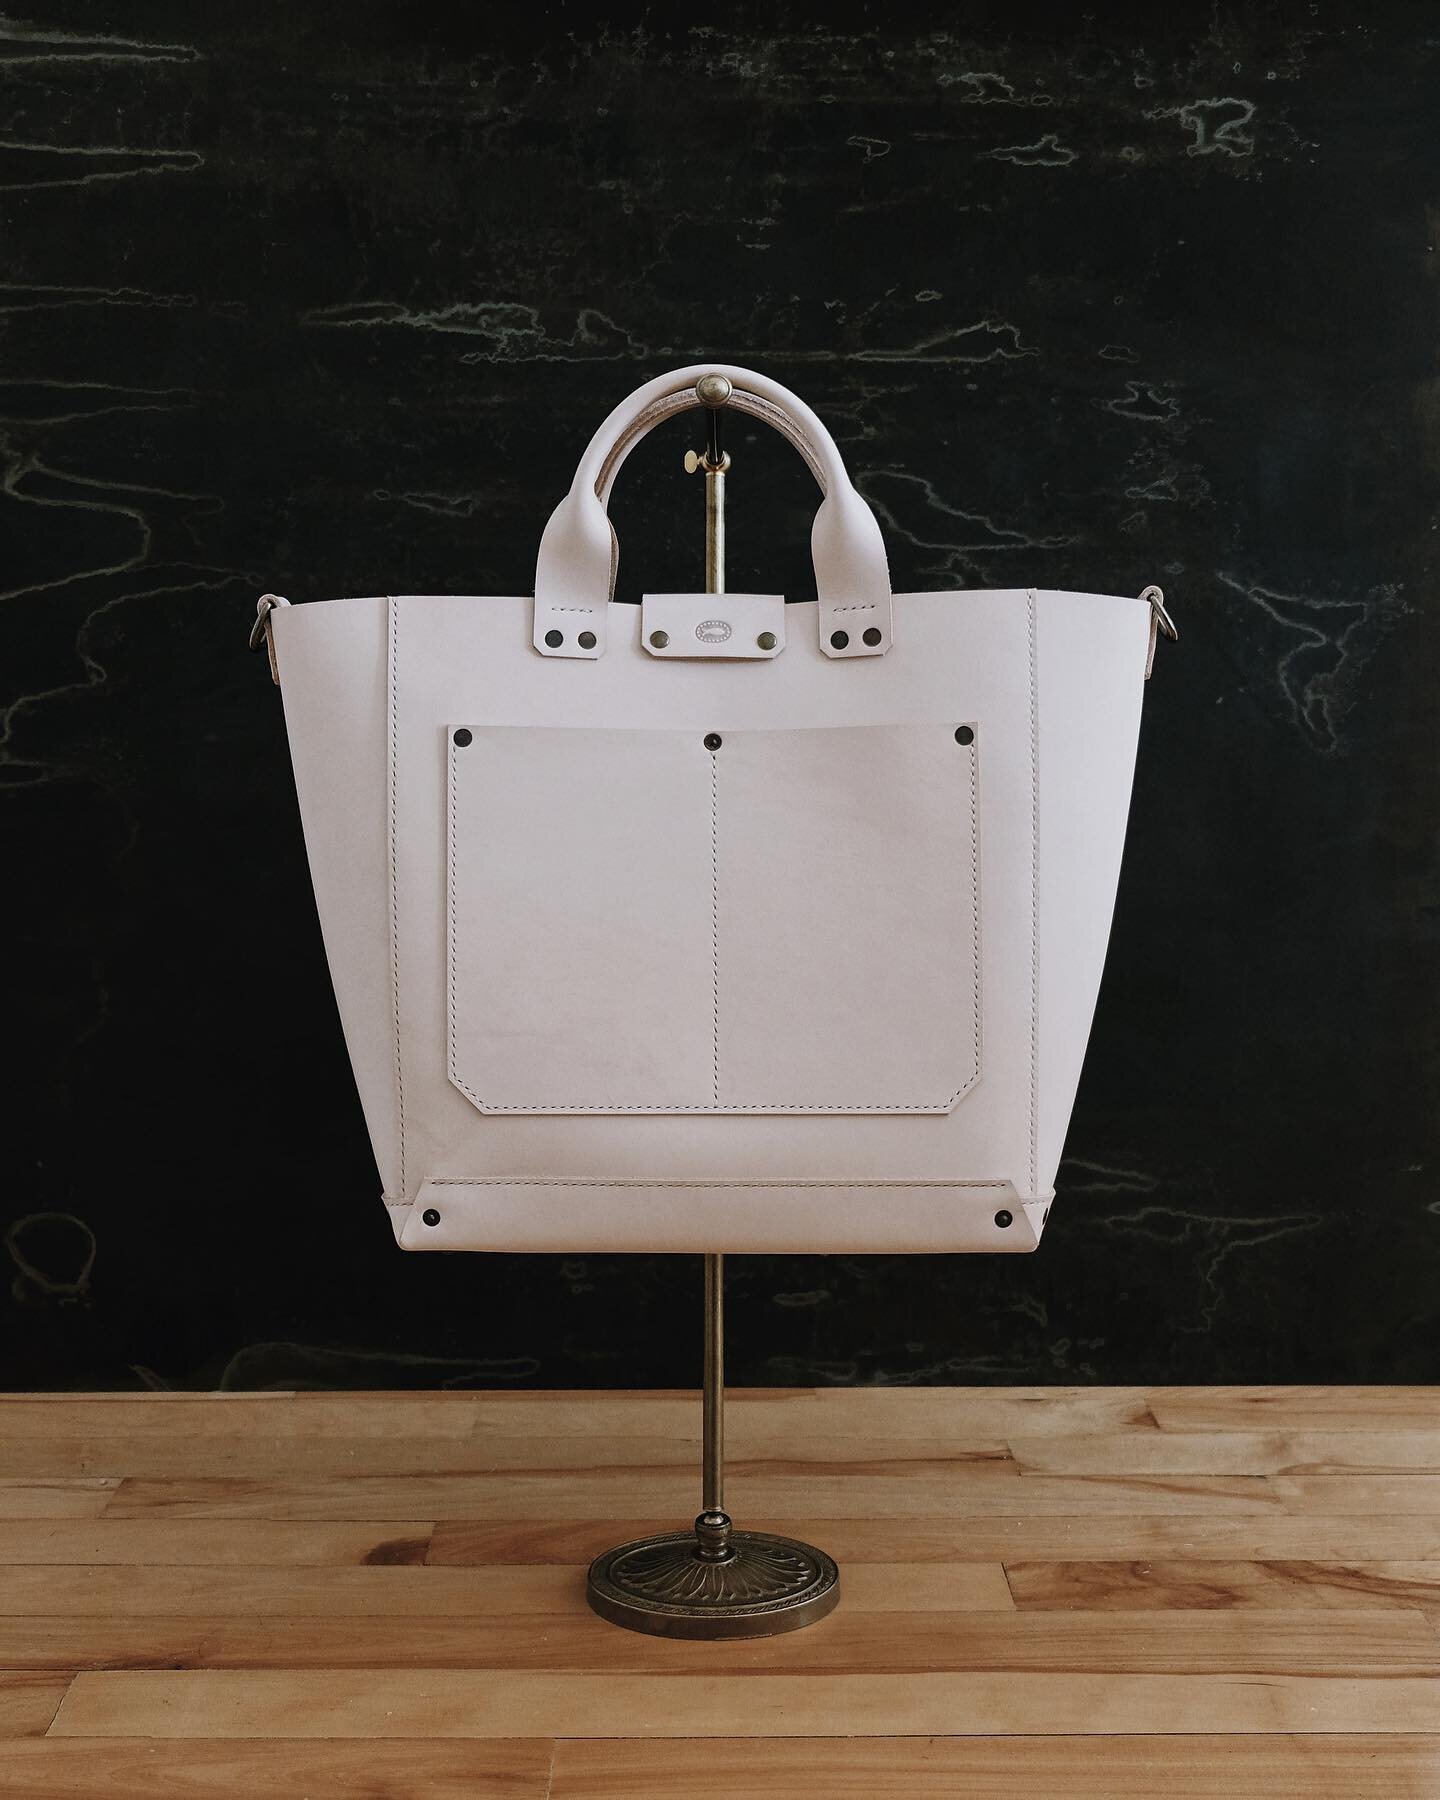 A workhorse for daily use, travel and weekend, in &lsquo;Nude&rsquo;. 

Bridging elegance and functionality, the Utility Tote is entirely made by hand from 4-5 oz. vegetable tanned leather. Parts are hand cut, saddle stitched and secured with aged co